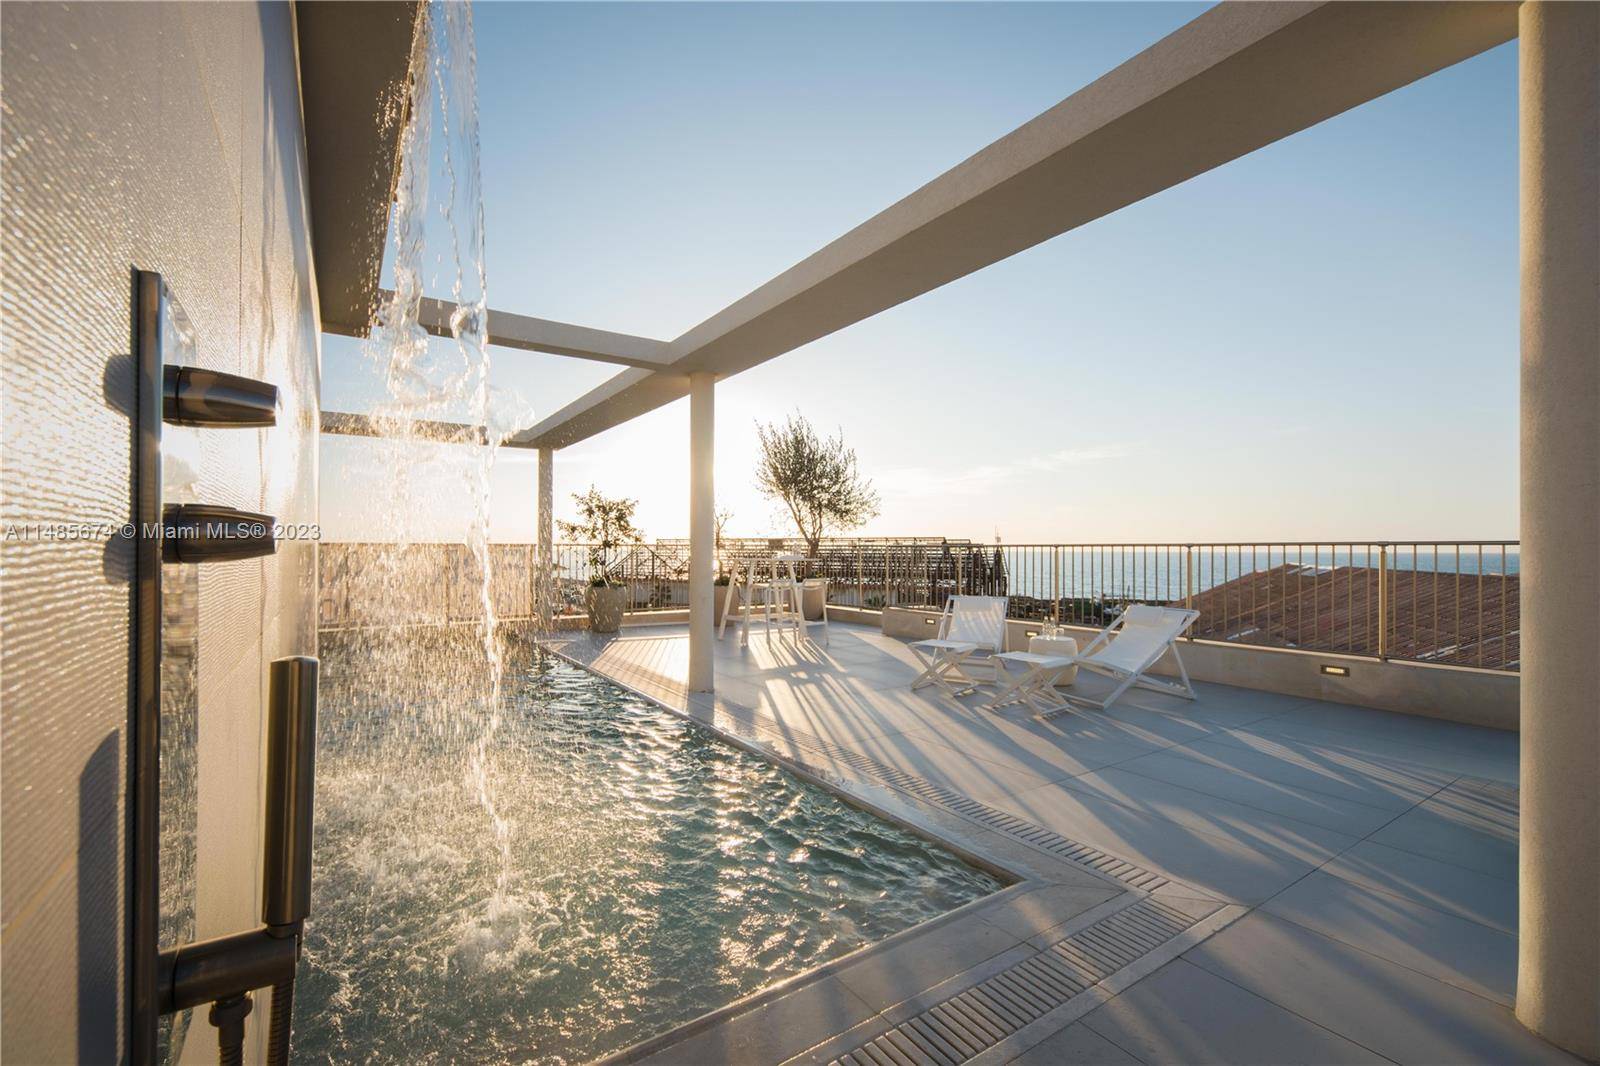 Welcome home to your palace in the sky, overlooking the blue Mediterranean Sea, and bathe in your private rooftop infinity pool.